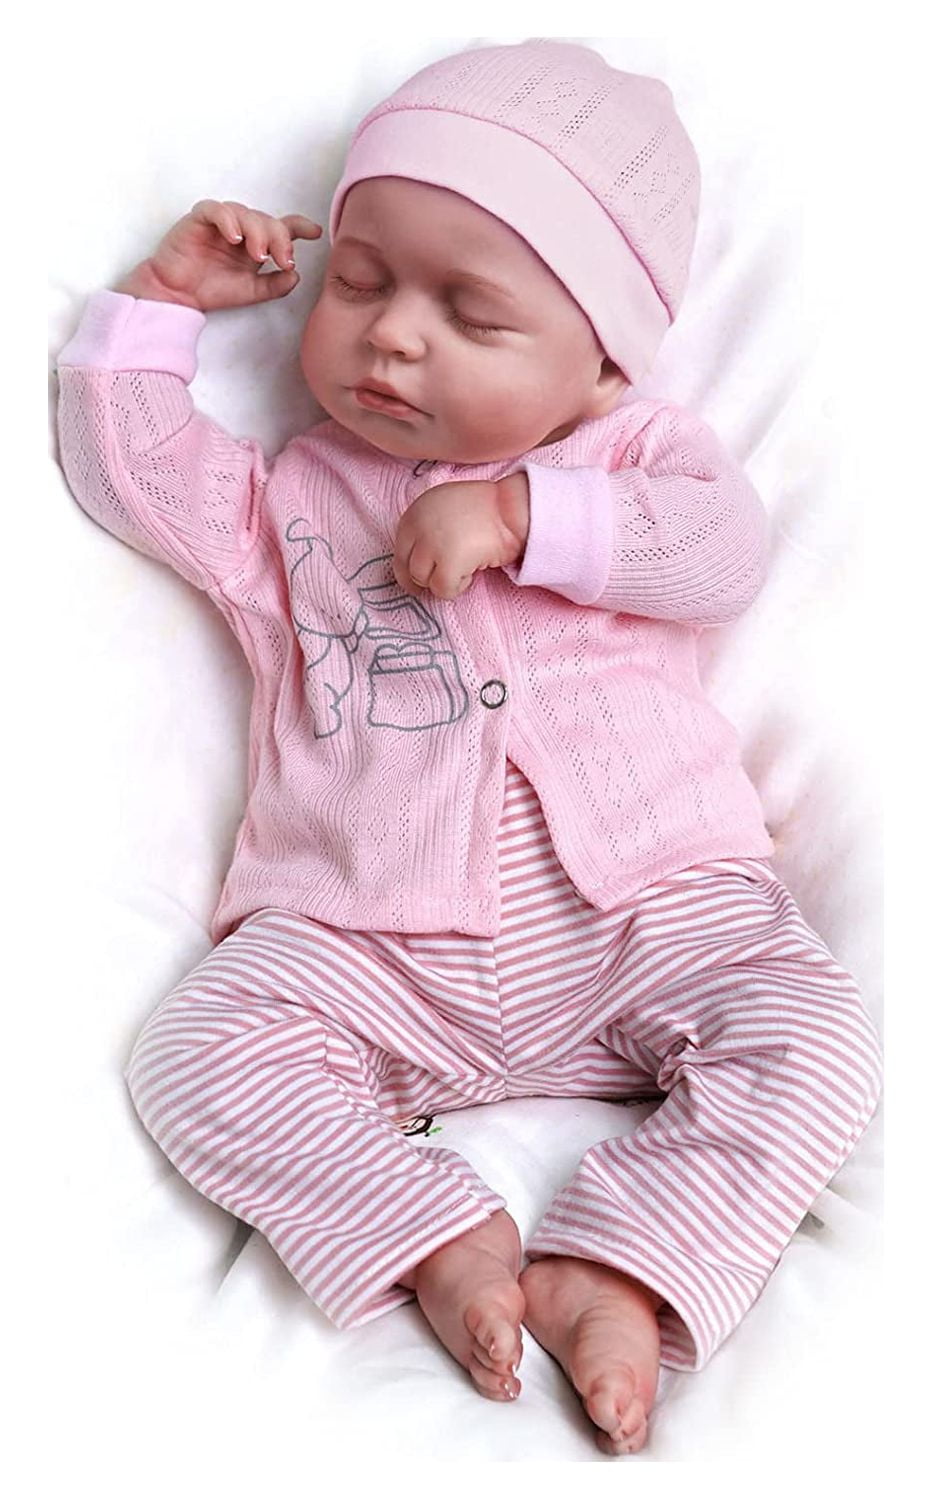  JIZHI Lifelike Reborn Baby Dolls - 18 Inch-Soft Body  Realistic-Newborn Baby Dolls American Sleeping Girl Real Life Dolls with  Clothes and Toy Accessories Gift for Kids Age 3+ : Toys 